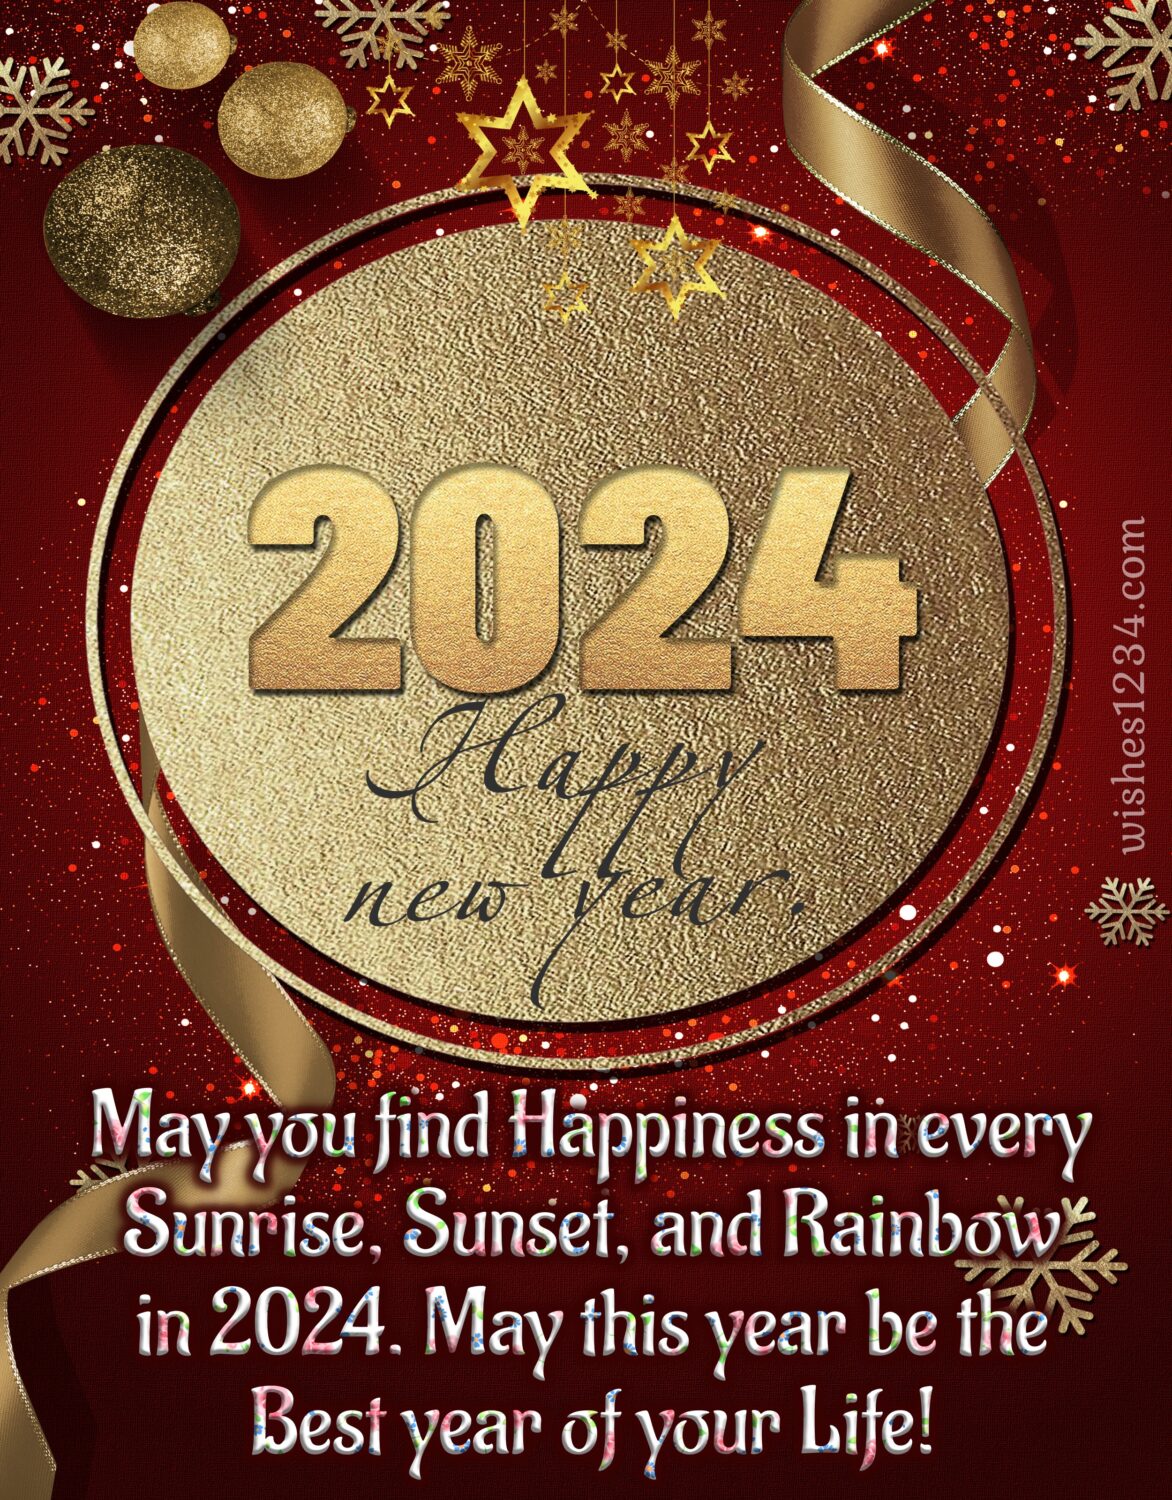 80+ Happy New Year 2024 Wishes for Your Loved Ones